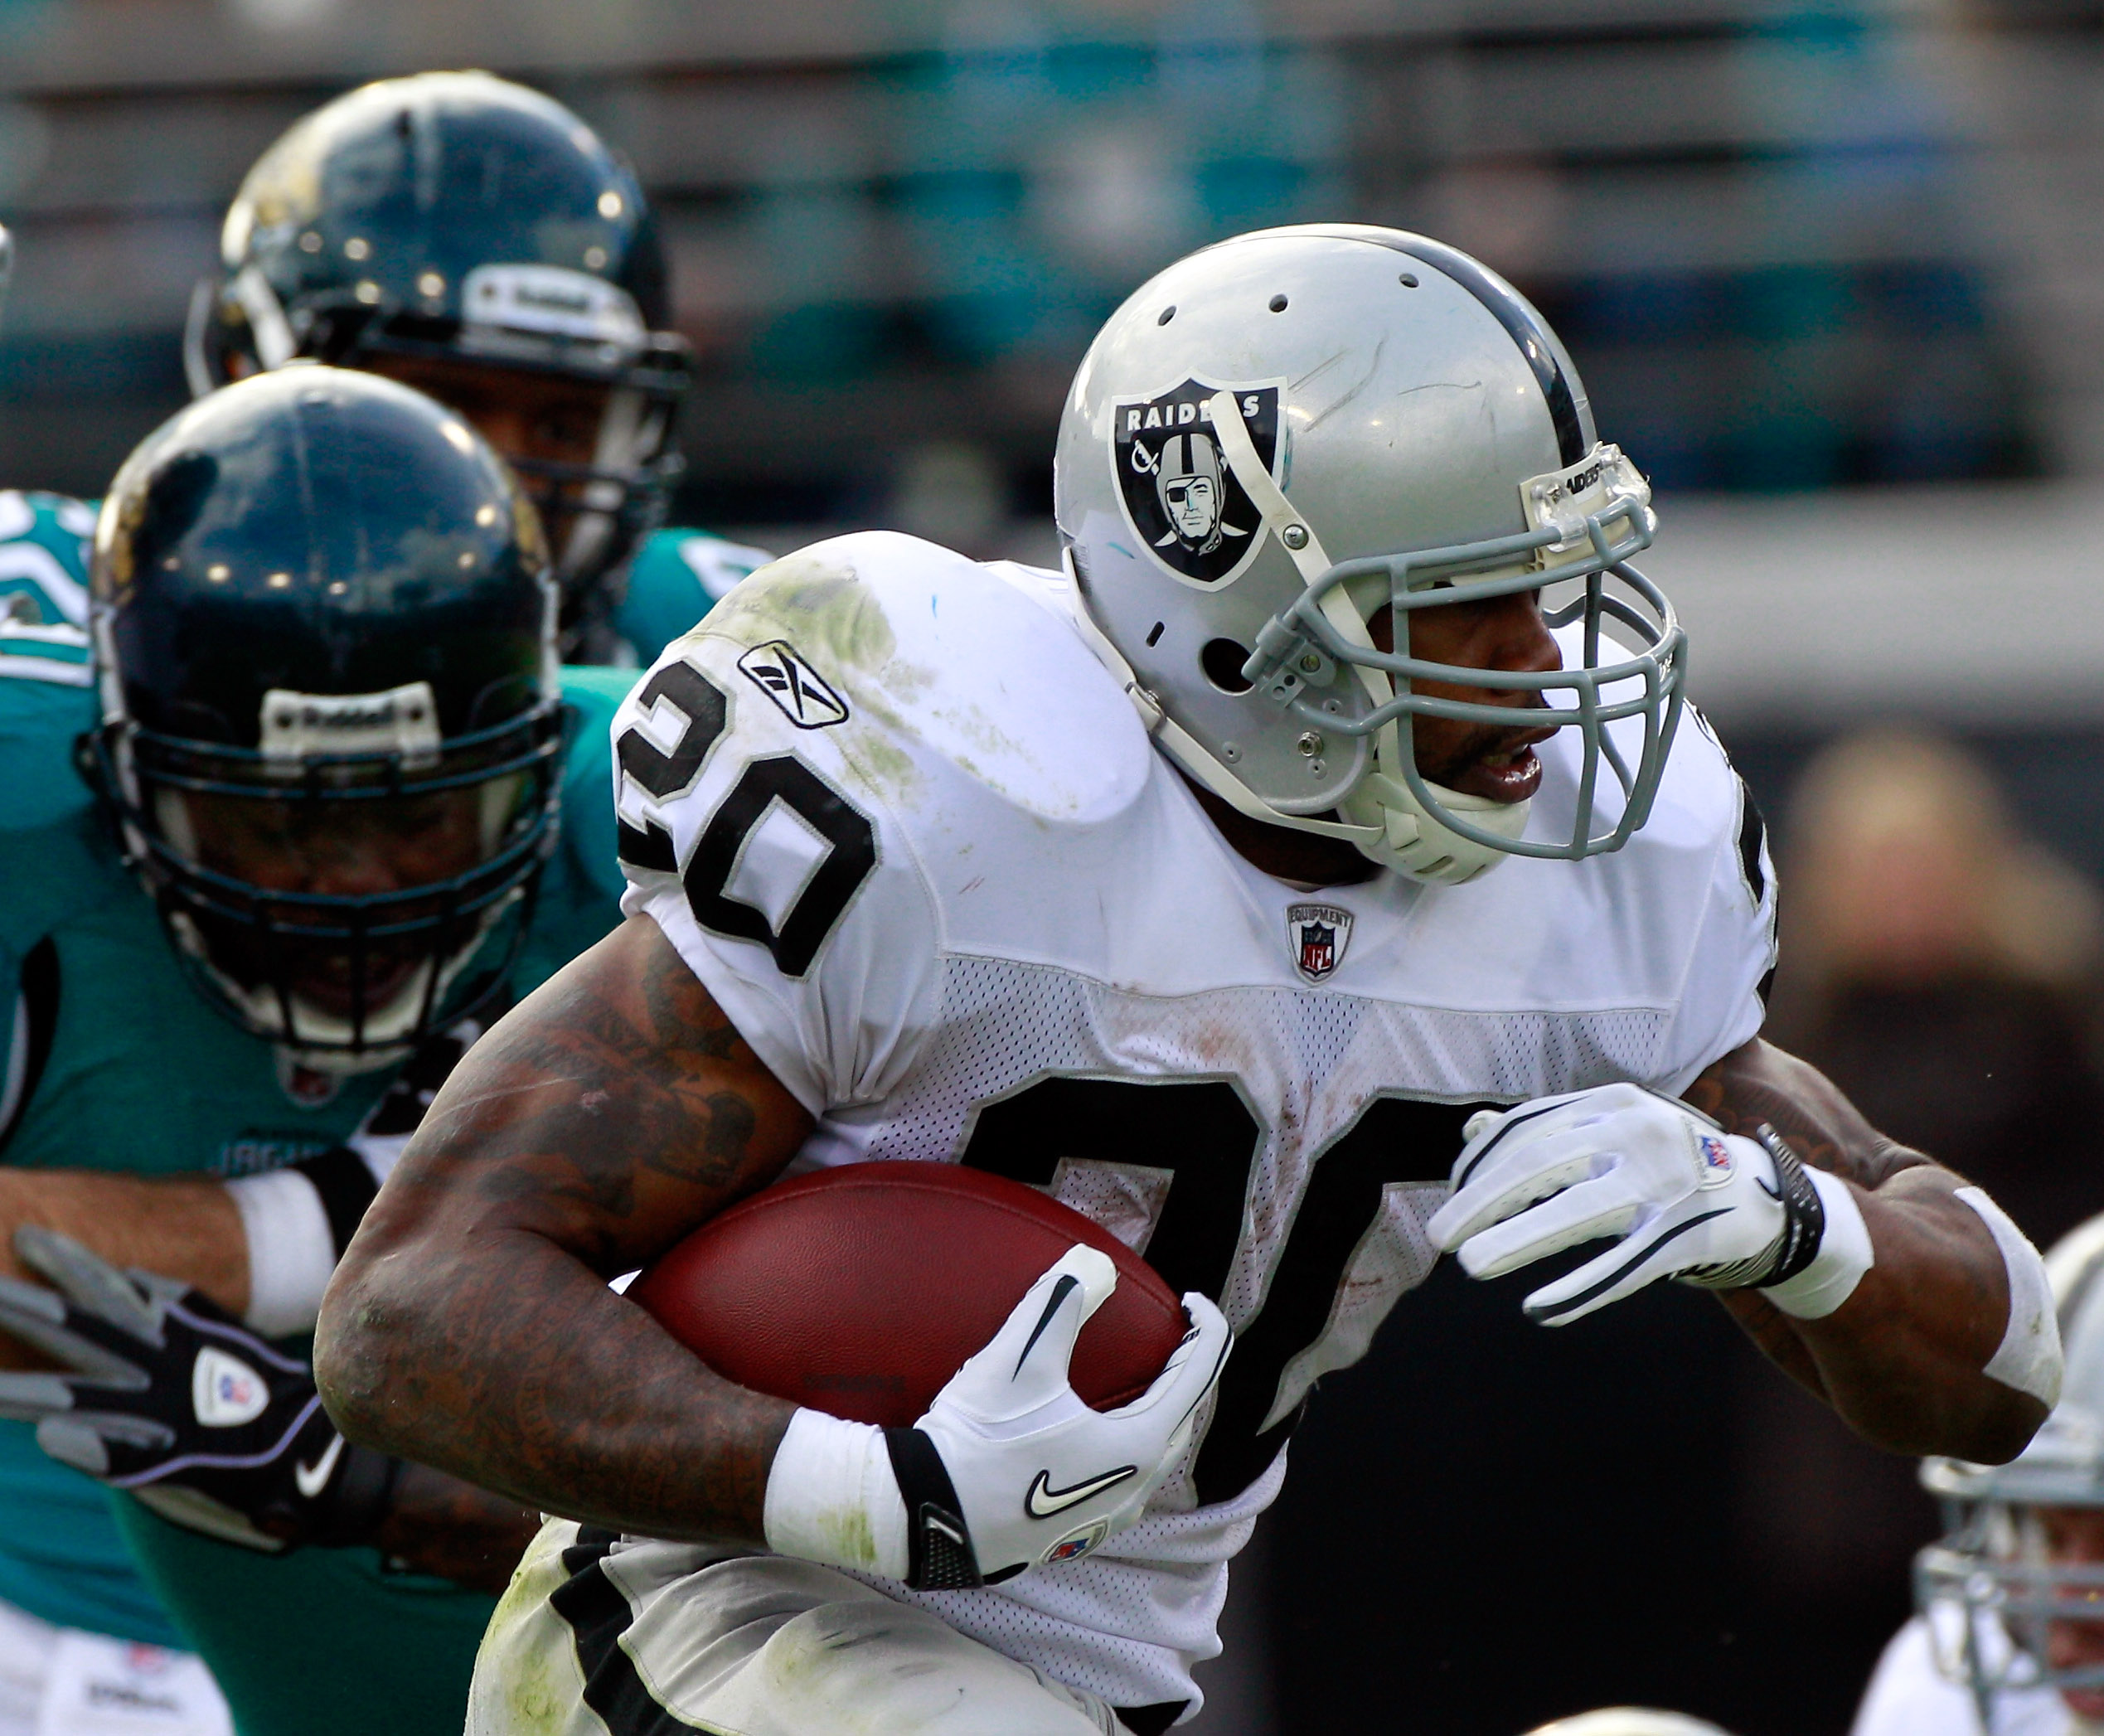 JACKSONVILLE, FL - DECEMBER 12:  Darren McFadden #20 of the Oakland Raiders runs for yardage during the game against the Jacksonville Jaguars at EverBank Field on December 12, 2010 in Jacksonville, Florida.  (Photo by Sam Greenwood/Getty Images)